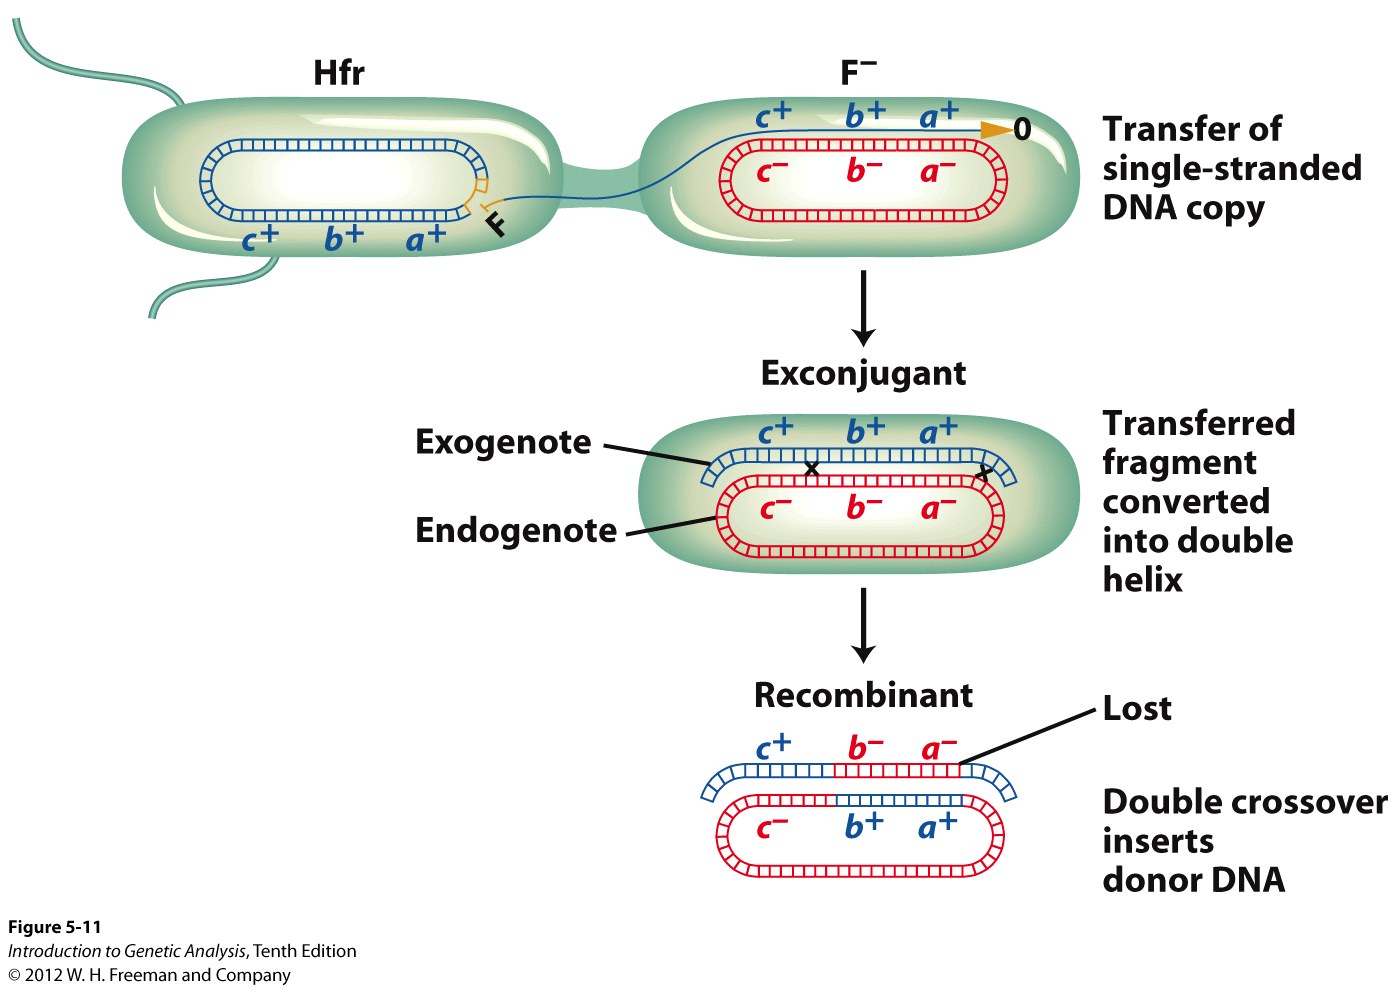 Crossovers integrate parts of the transferred donor fragment